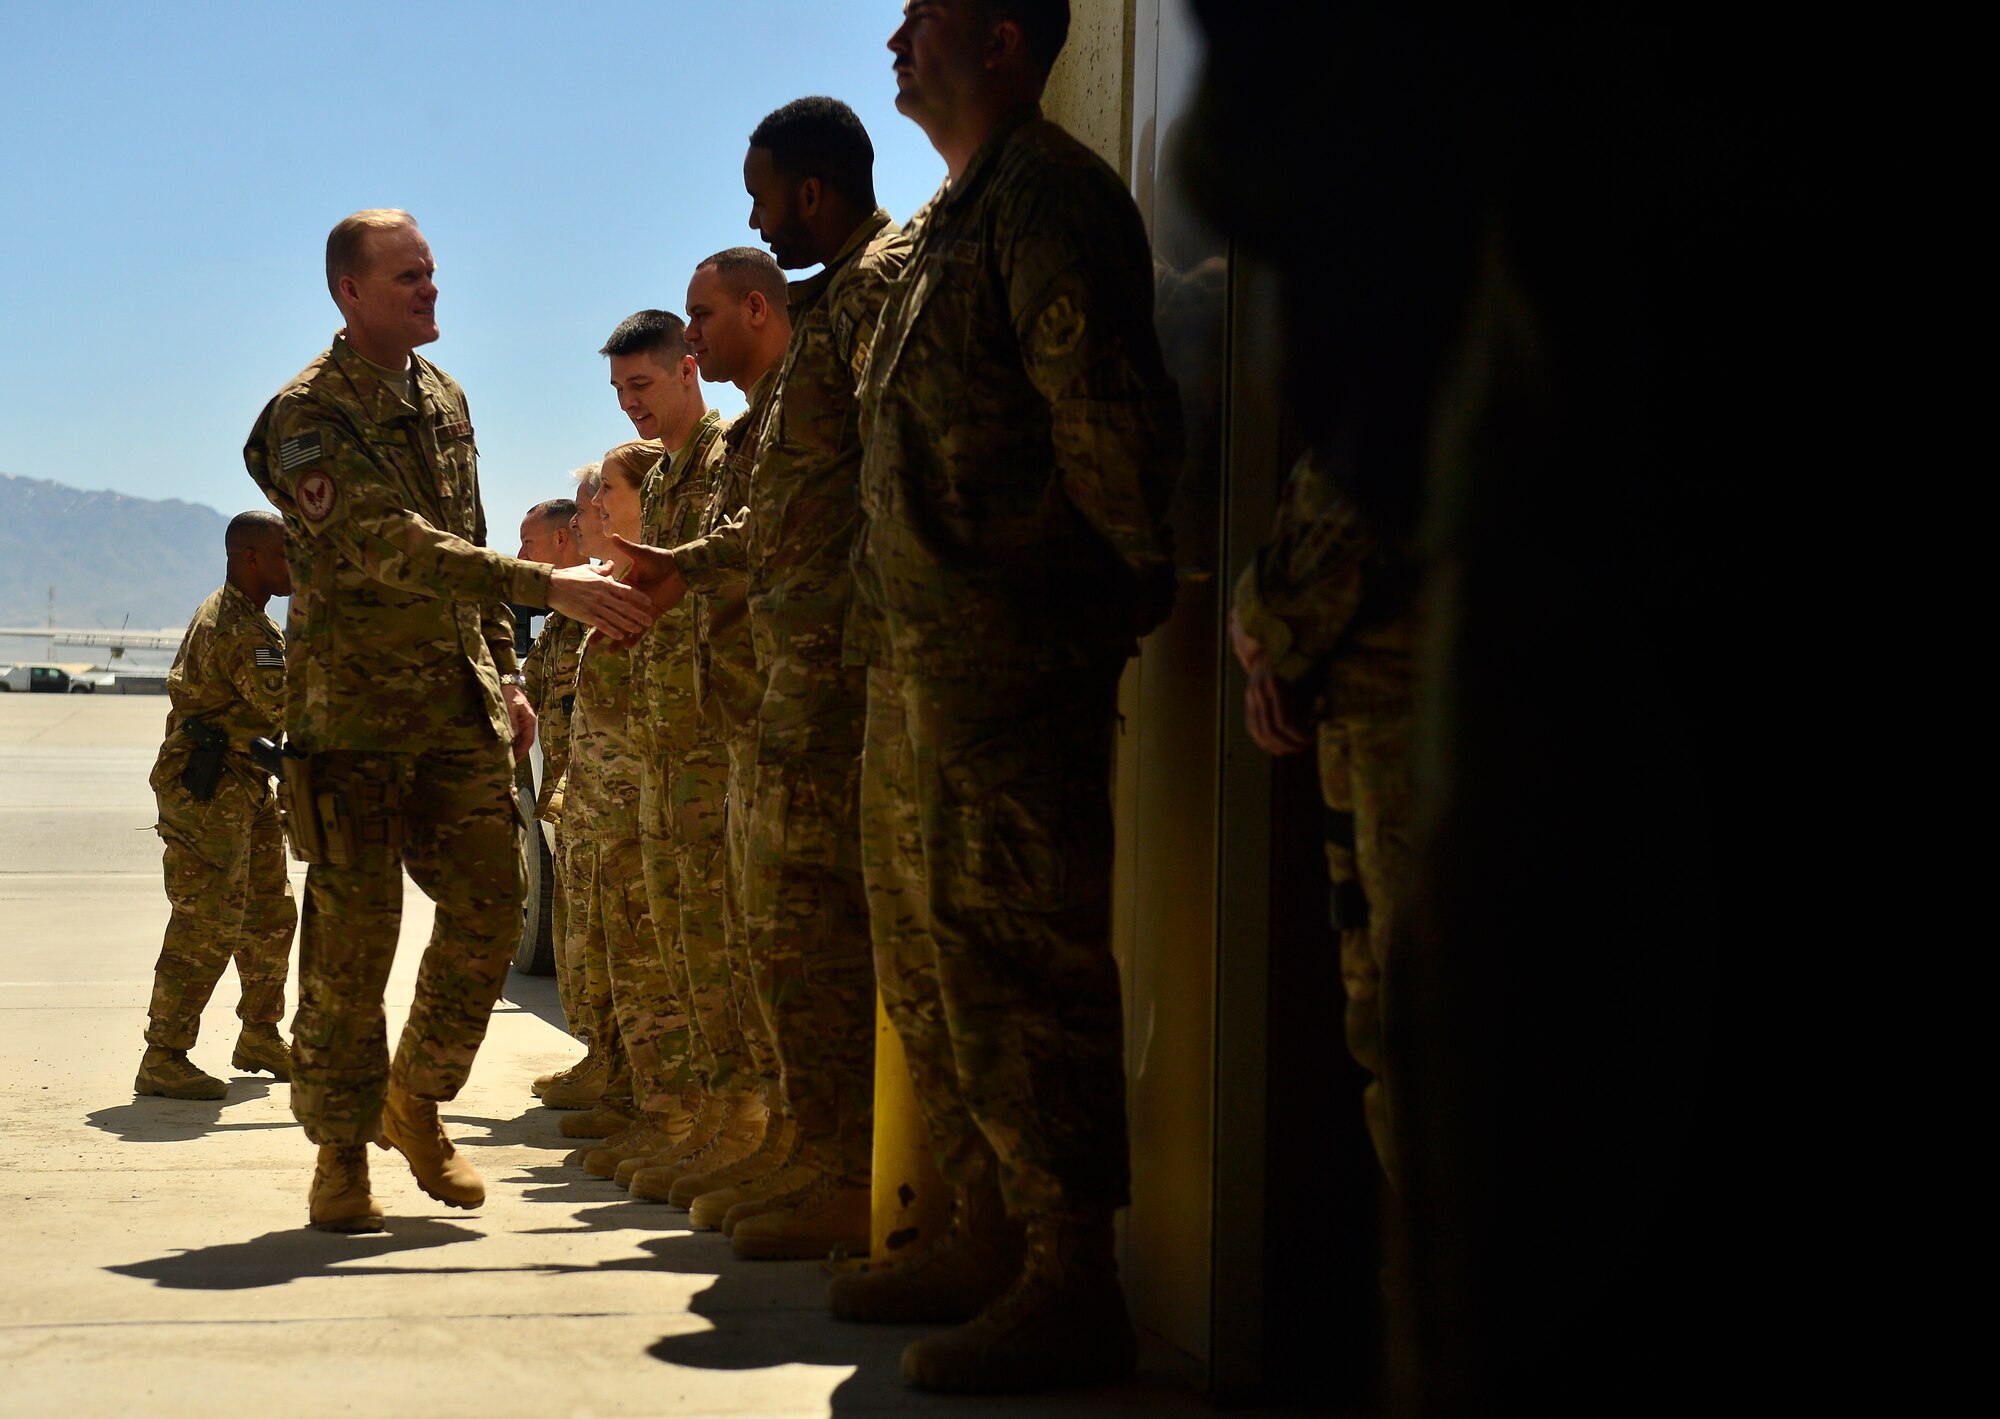 Chief Master Sgt. of the Air Force James Cody shakes hands with 455th Combat Medical Airmen during a visit April 13, 2014, at Bagram Air Field, Afghanistan. Airmen from 4th Expeditionary Rescue Squadron, 83rd Expeditionary Rescue Squadron and 41st Electronic Combat Squadron each explained their role in support of Operation Enduring Freedom. Cody visited Bagram Air Field to encourage, inform and congratulate Airmen for hard work throughout Operation Enduring Freedom. (U.S. Air Force photo/Staff Sgt. Vernon Young Jr.)